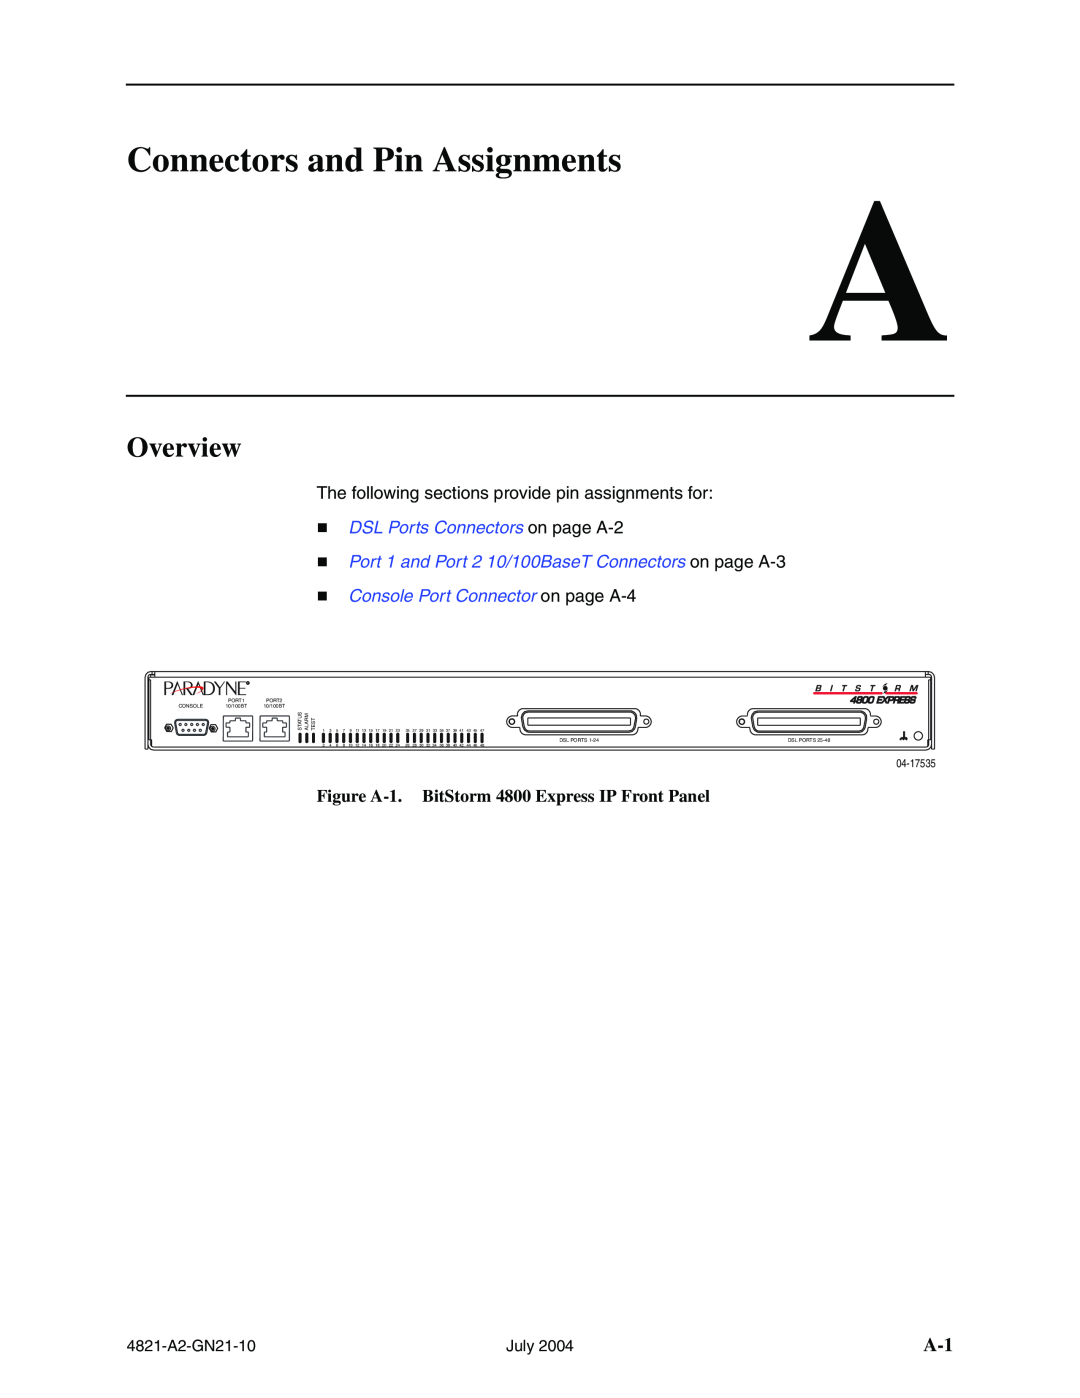 Paradyne 4800 Express Connectors and Pin Assignments, „ DSL Ports Connectors on page A-2, Overview, 04-17535, Dsl Ports 